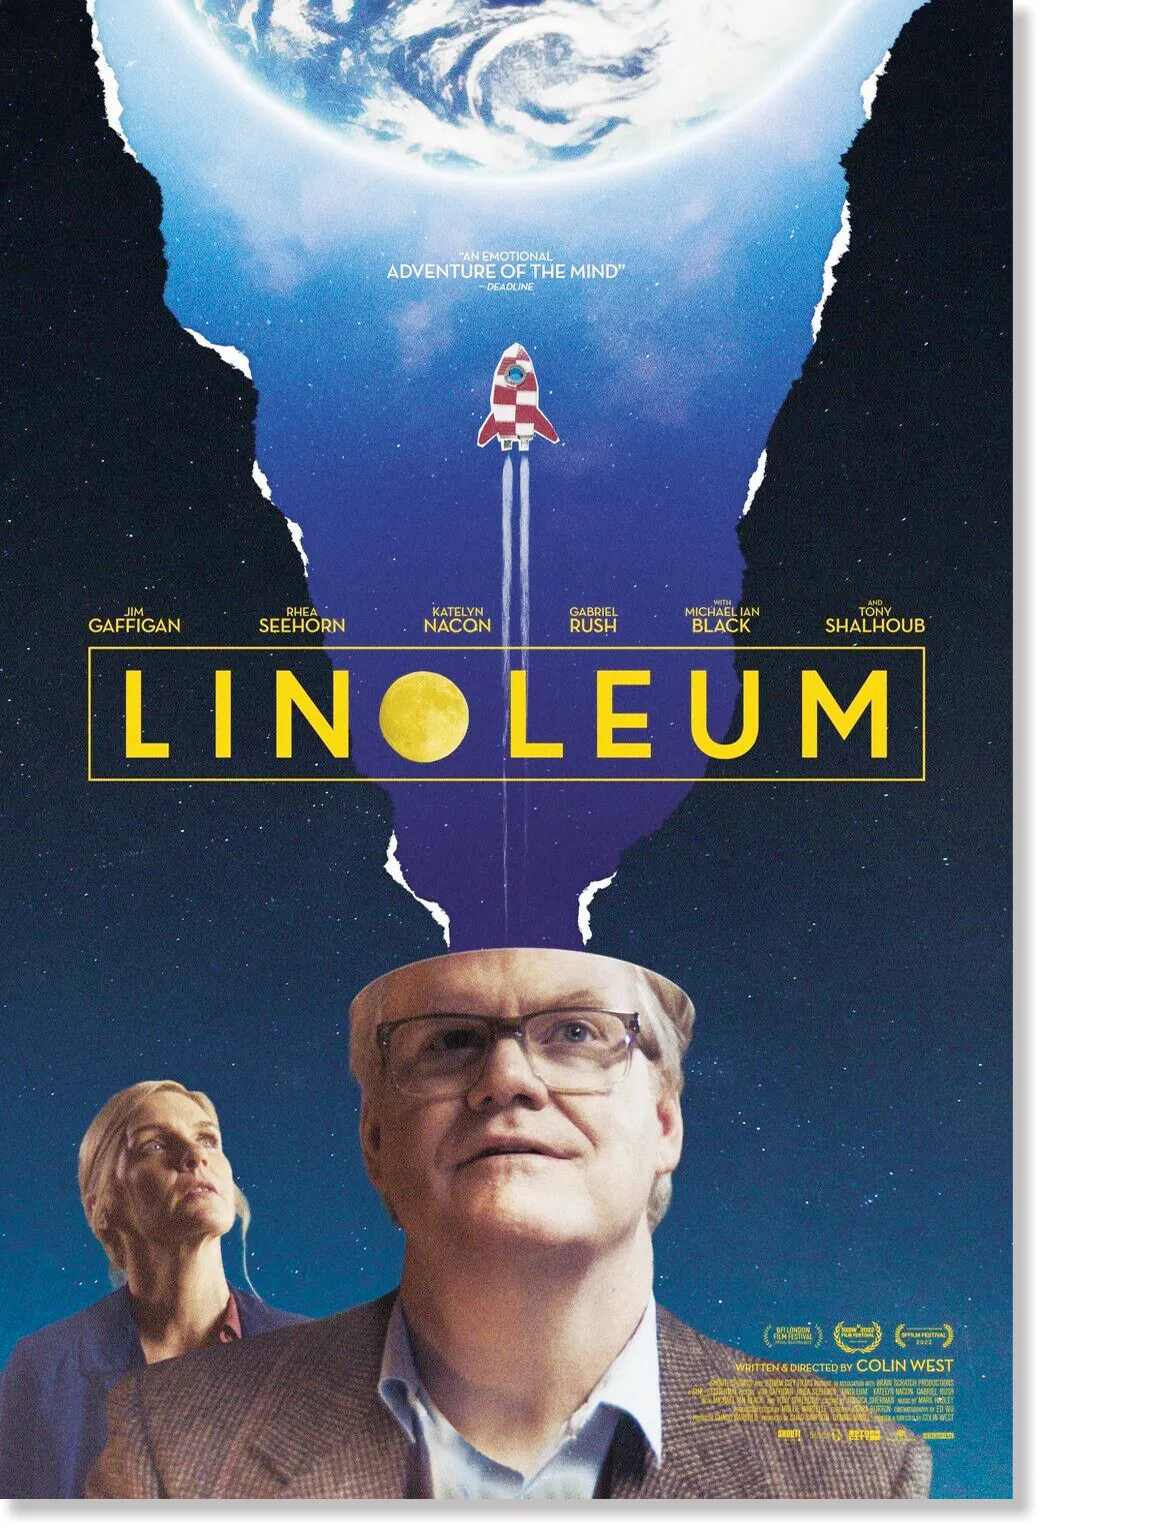 A movie poster says “Linoleum” and shows a male actor and a woman behind him looking toward the sky. Coming out of the man’s head is a path to space, appearing as if the poster has been torn and it is underneath, and there is a little illustrated rocket flying up.